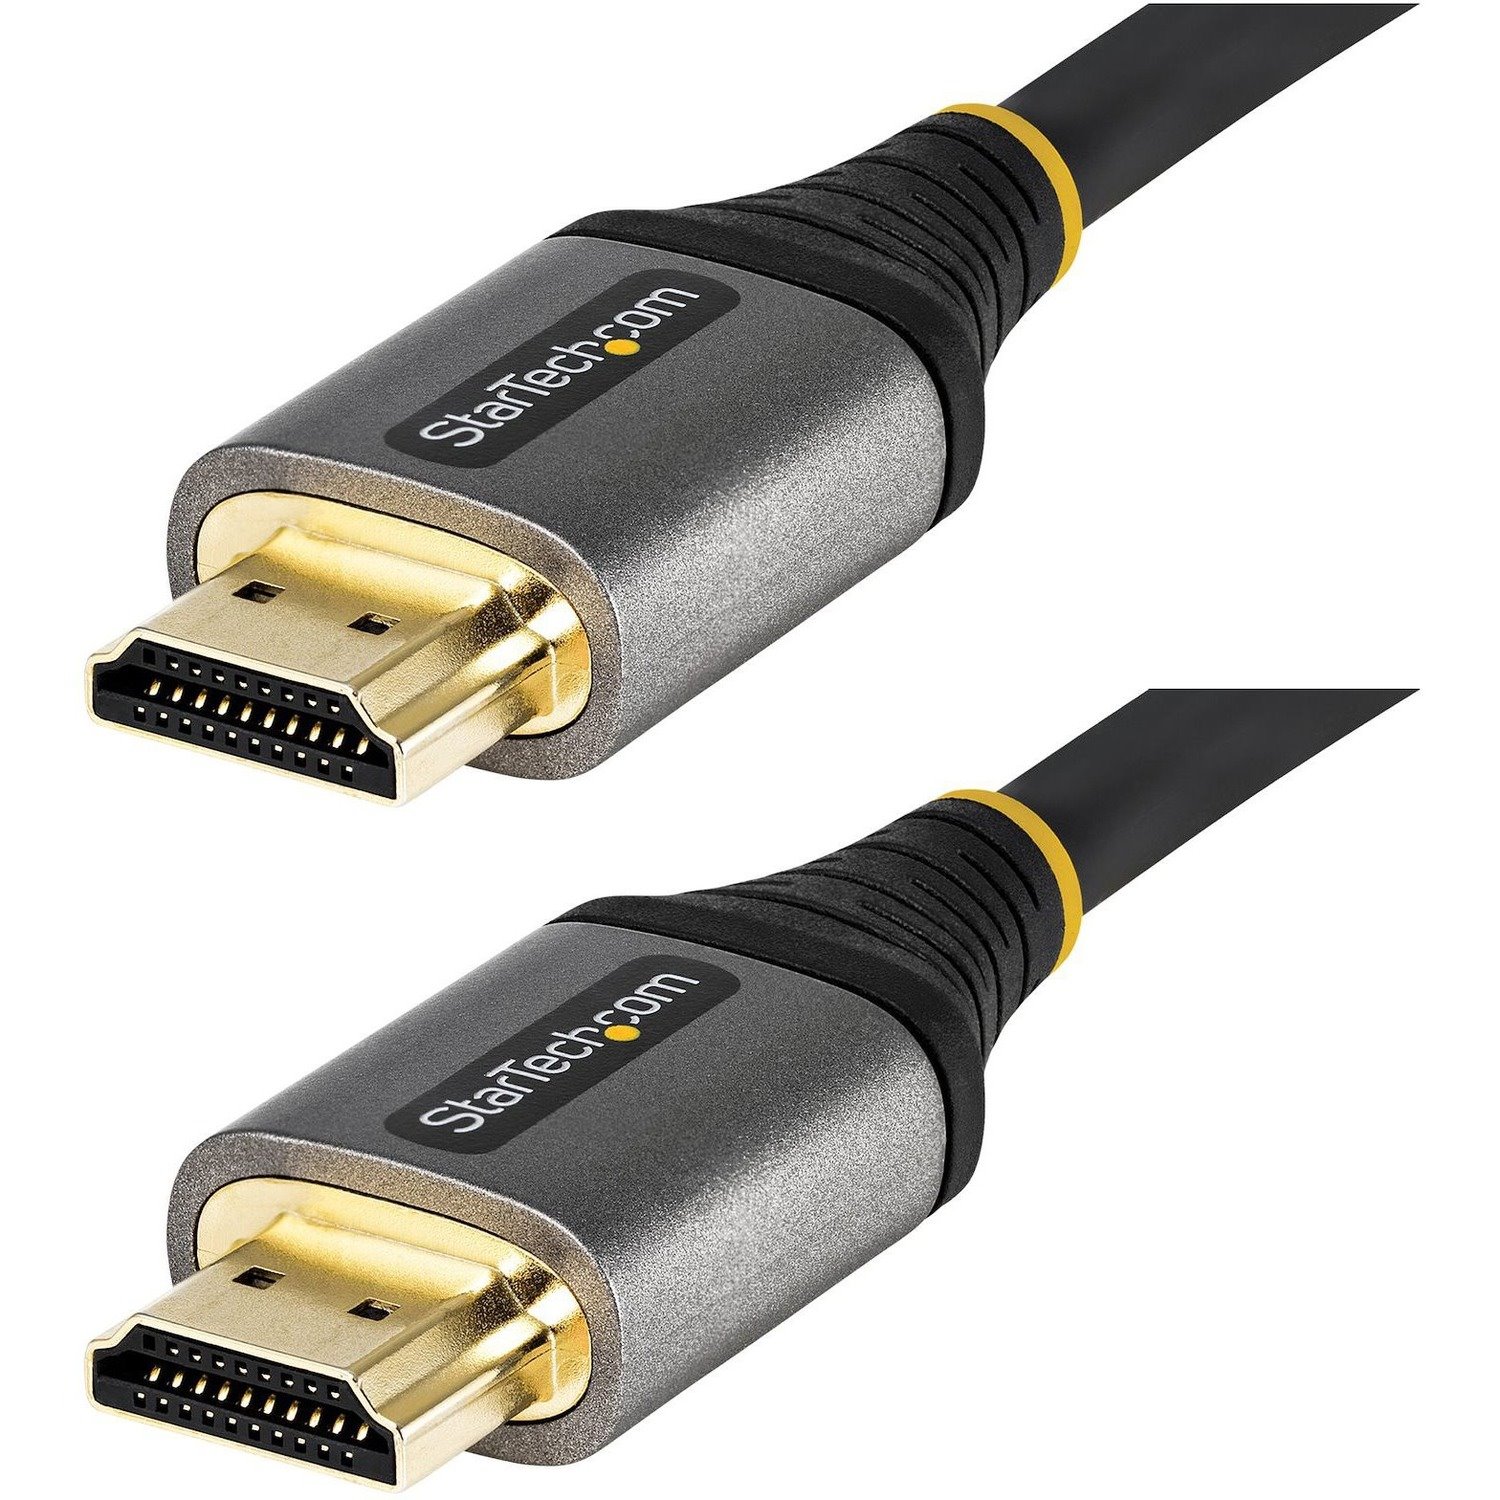 StarTech.com 2 m HDMI A/V Cable for Audio/Video Device, Monitor, Notebook, Desktop Computer, TV, Home Theater System, Digital Signage Player, Workstation, Projector, Apple TV, PC